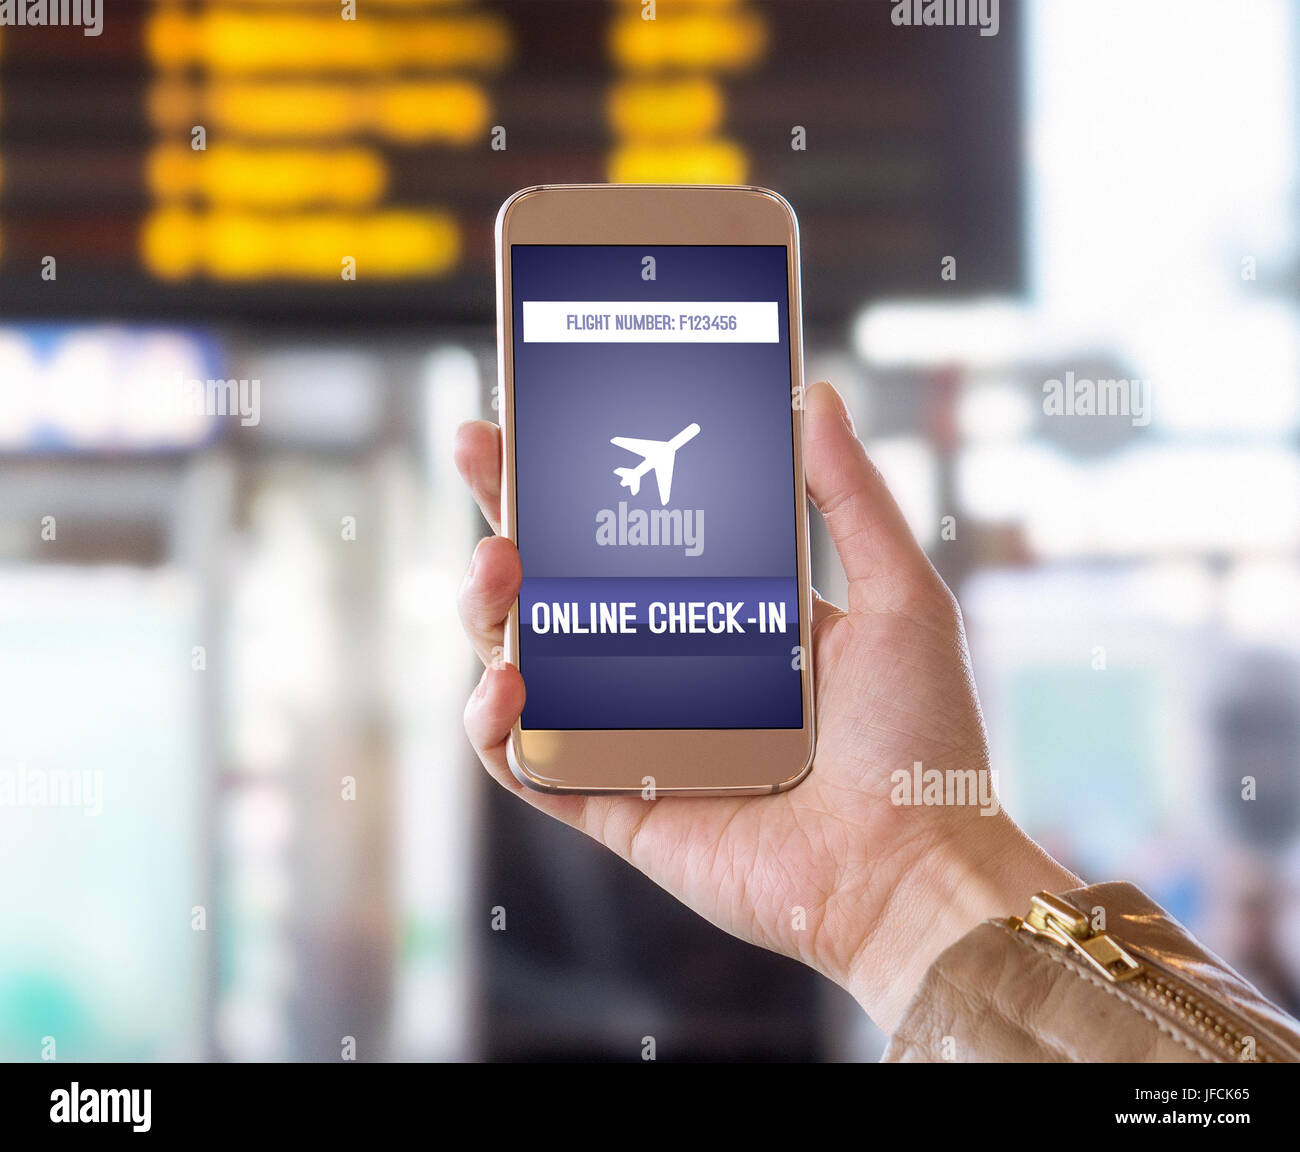 Online check in with mobile phone in airport. Woman checking in to flight with smartphone on the web. Internet self service provided by airline. Stock Photo